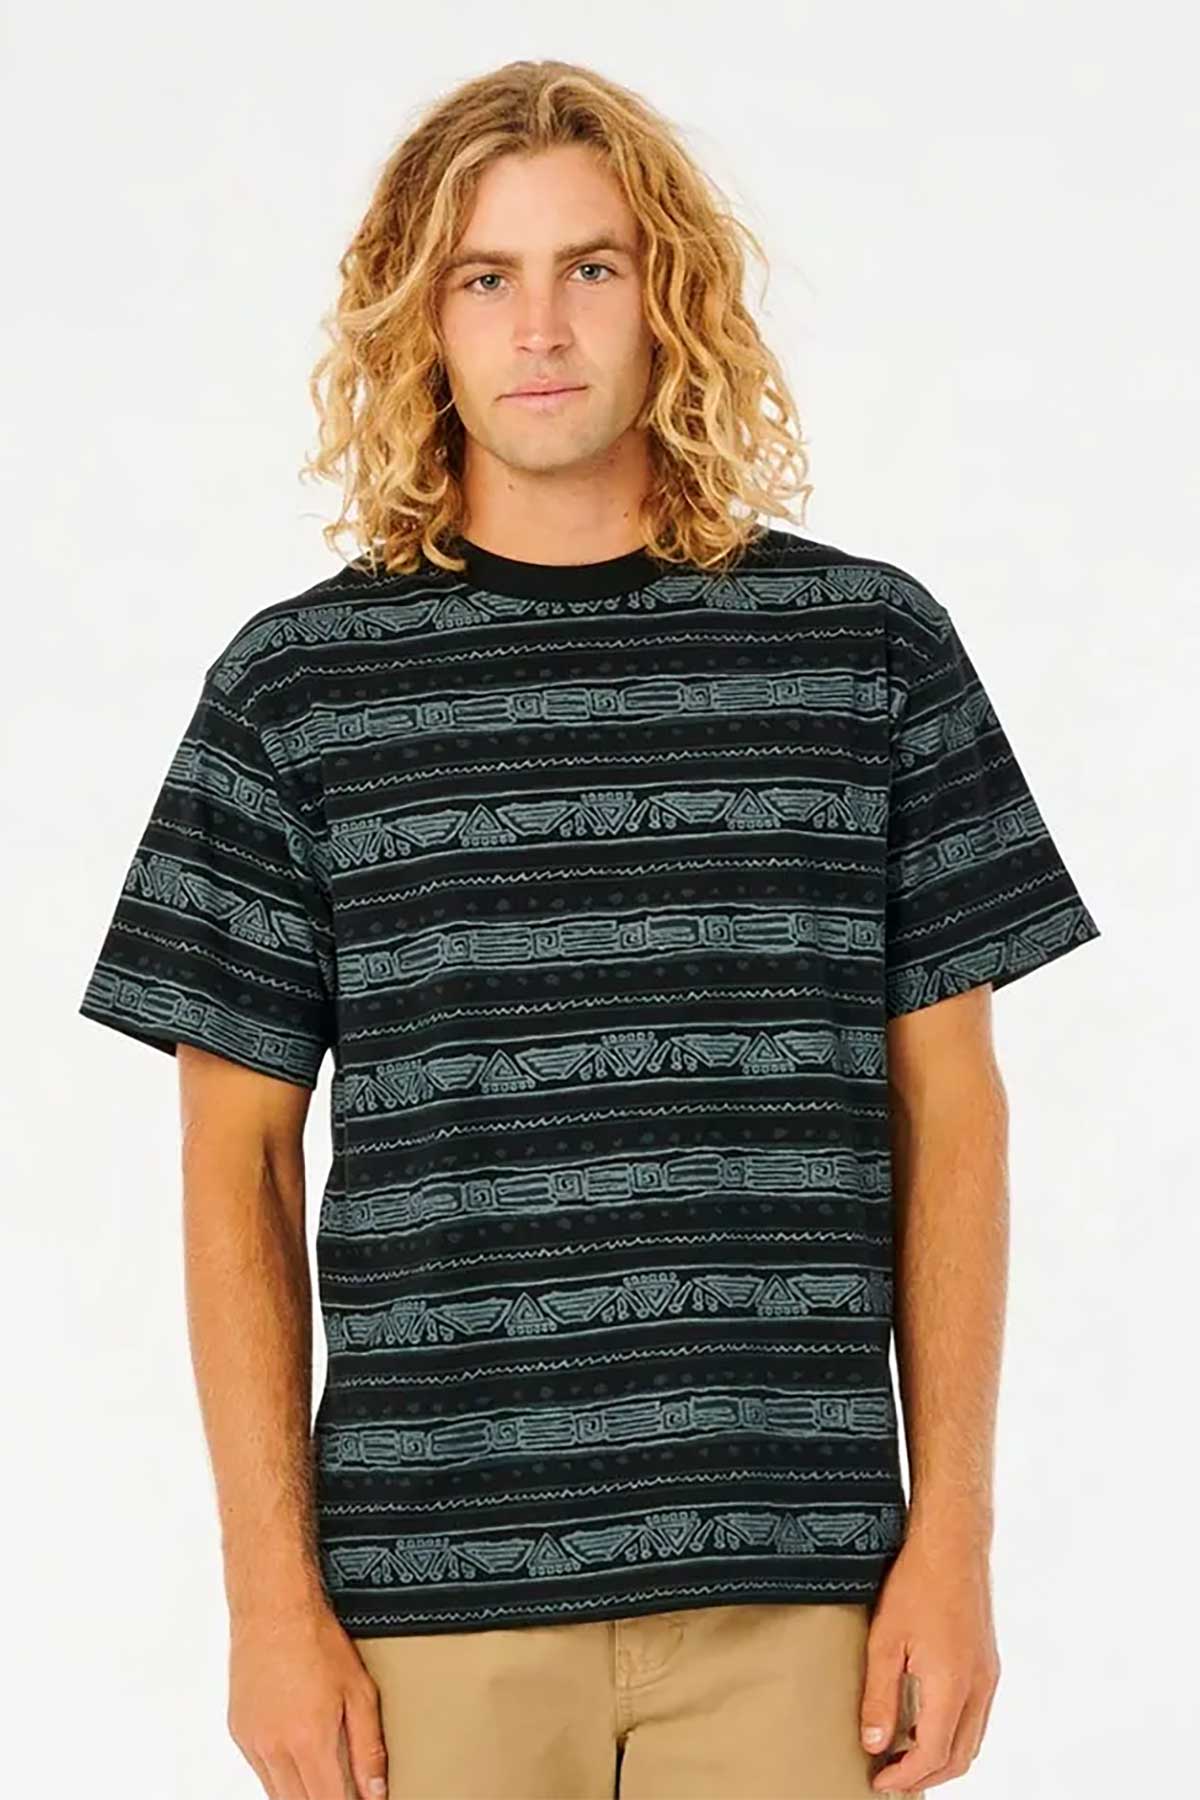 Rip Curl Boys Tee - Archive lost tracks